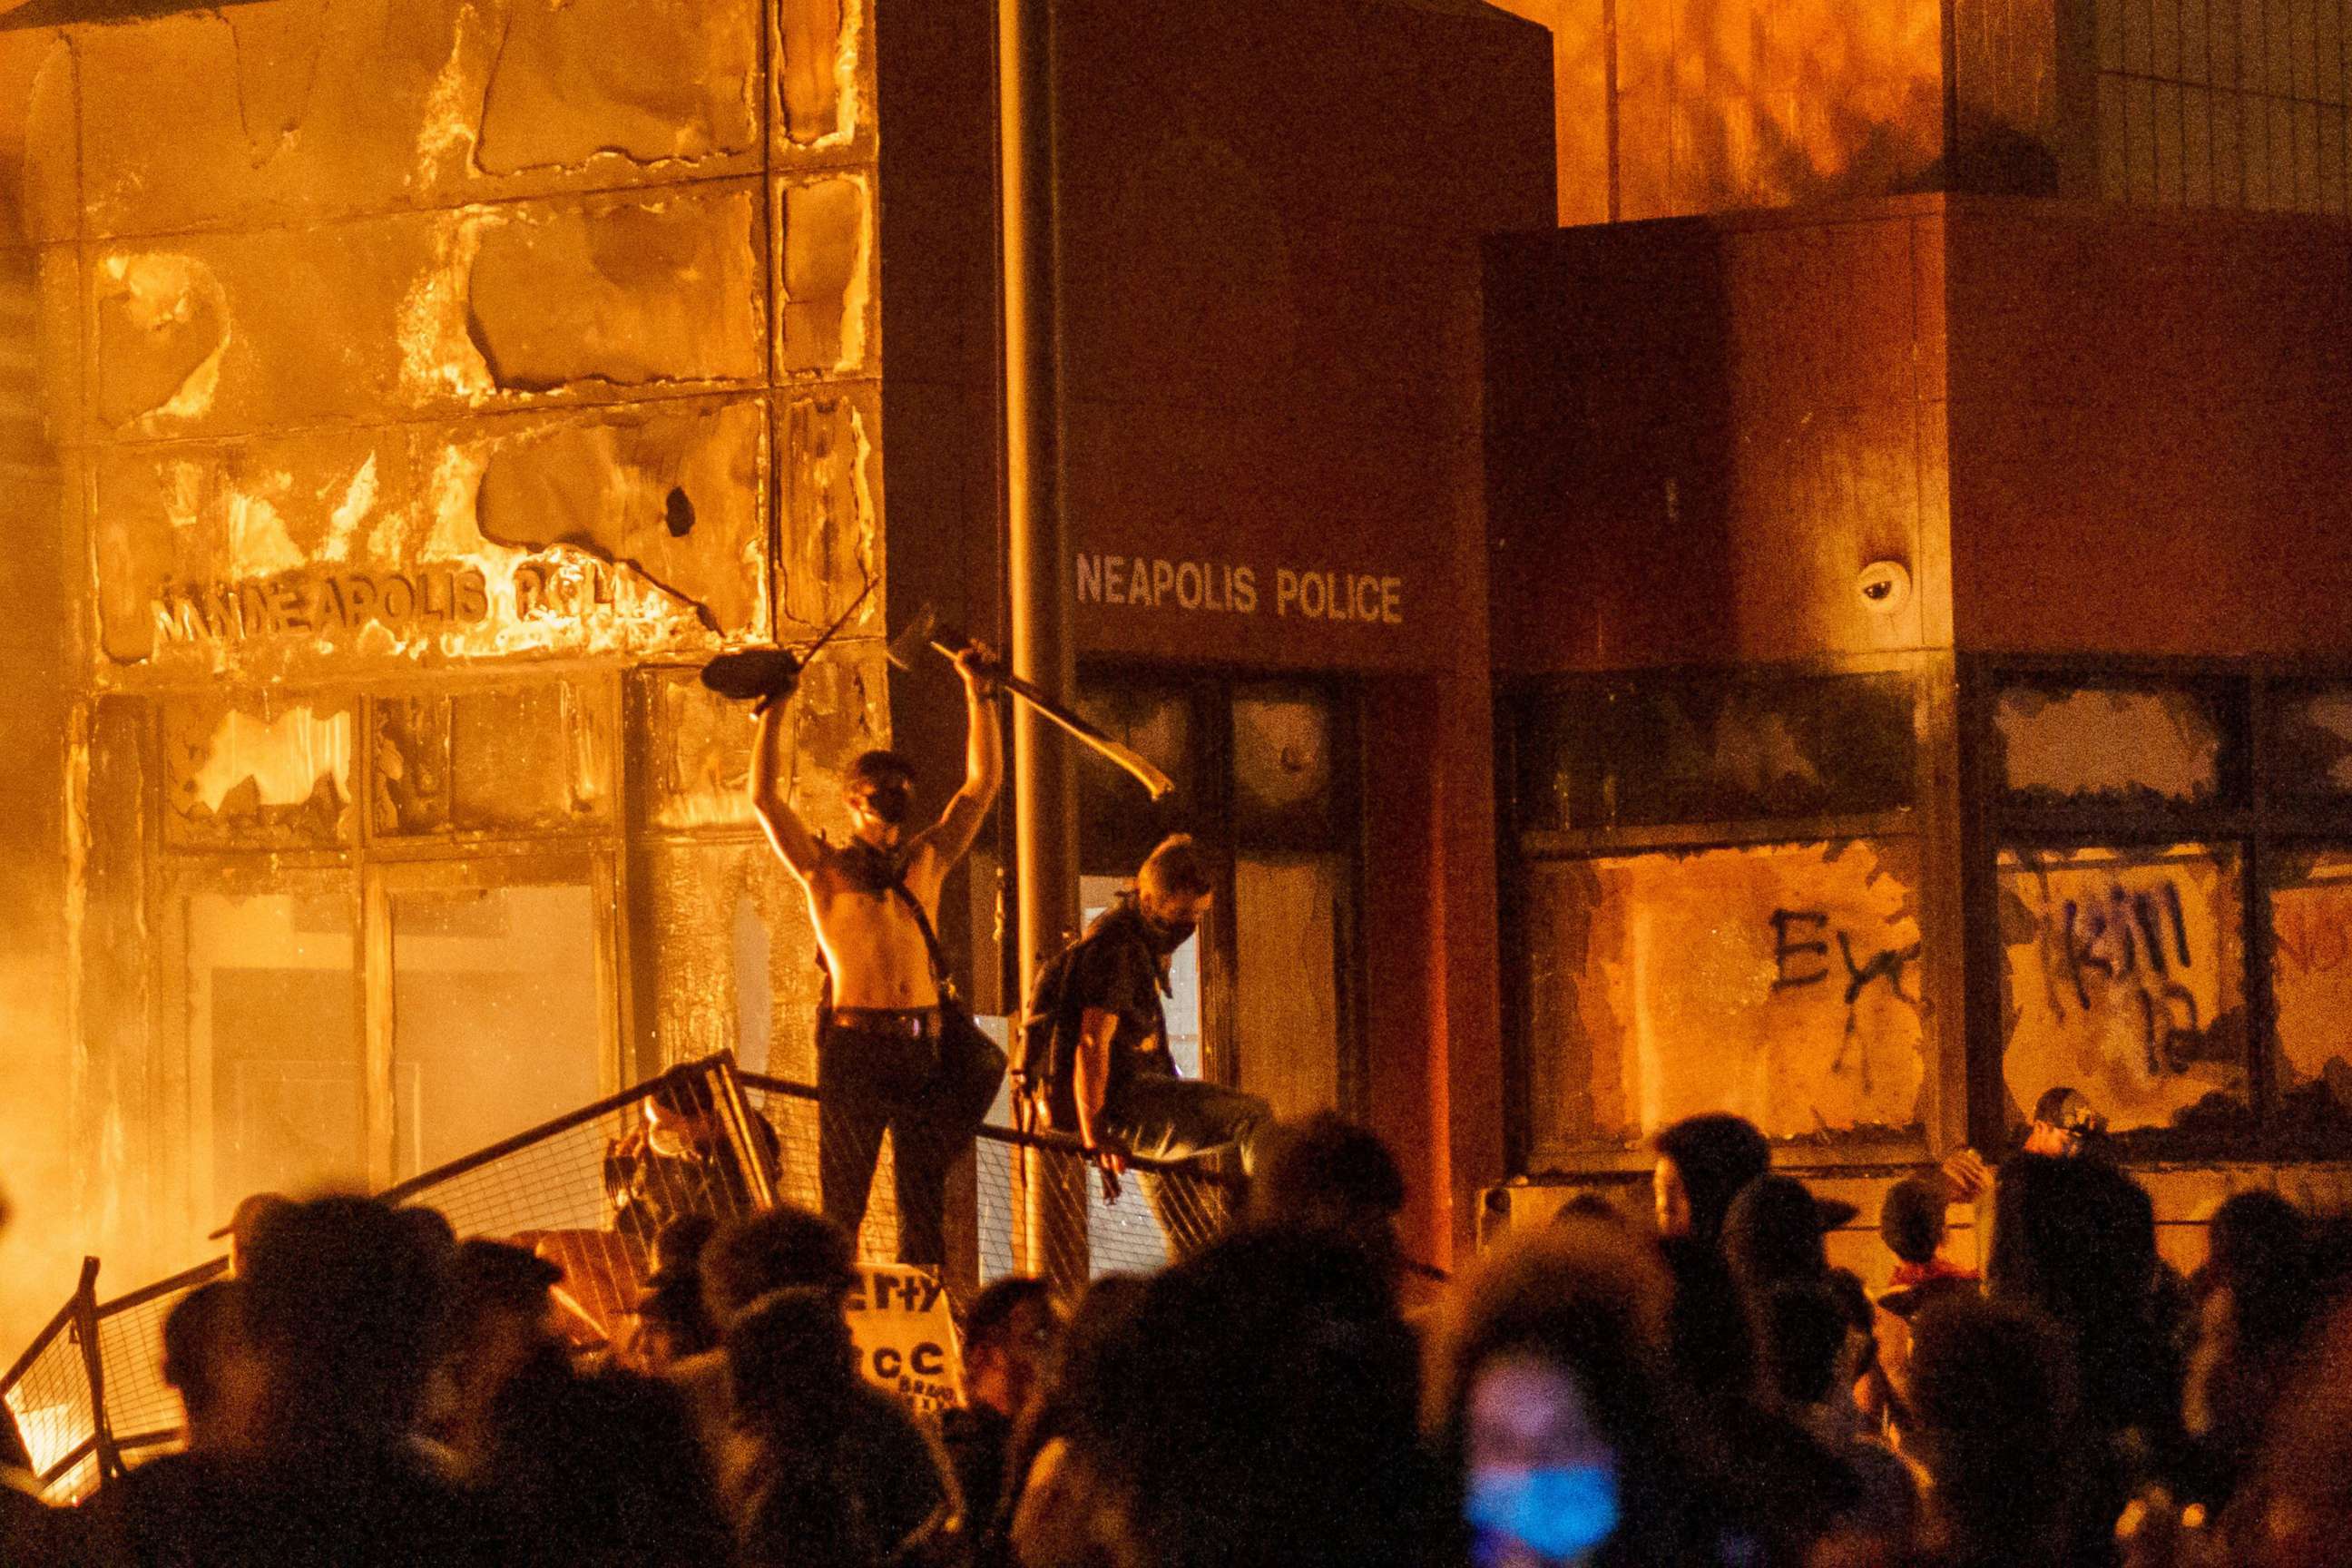 PHOTO: In this May 28, 2020, file photo, flames from a nearby fire illuminate protesters standing on a  barricade in front of the Third Police Precinct in Minneapolis.